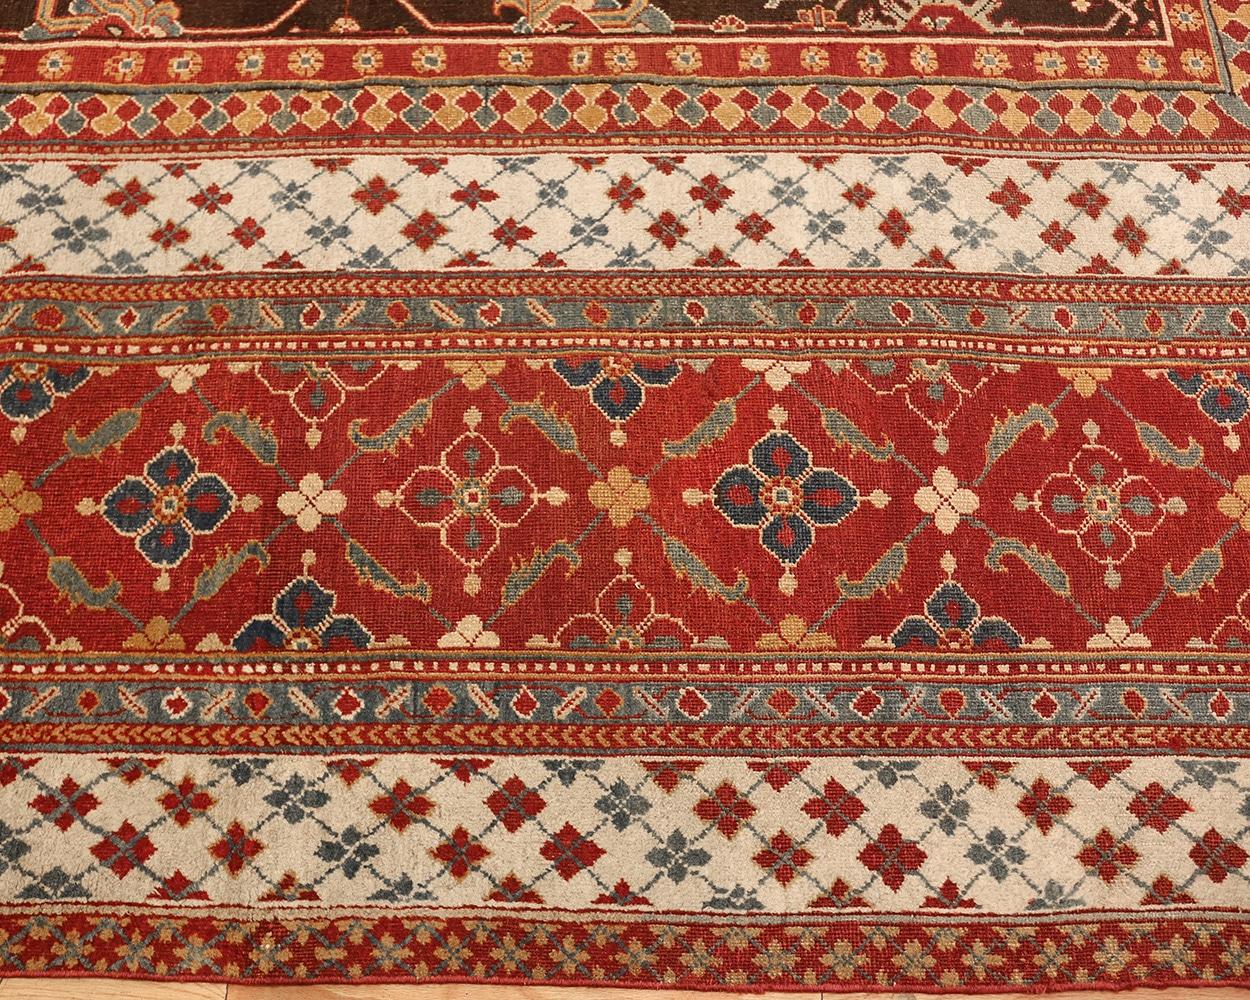 Beautiful large scale design brown antique oriental oversized Indian Agra rug, country of origin: india,date circa late 19th century. Size: 15 ft 2 in x 23 ft 8 in (4.62 m x 7.21 m)

A combination of reds and rich chocolate browns create a